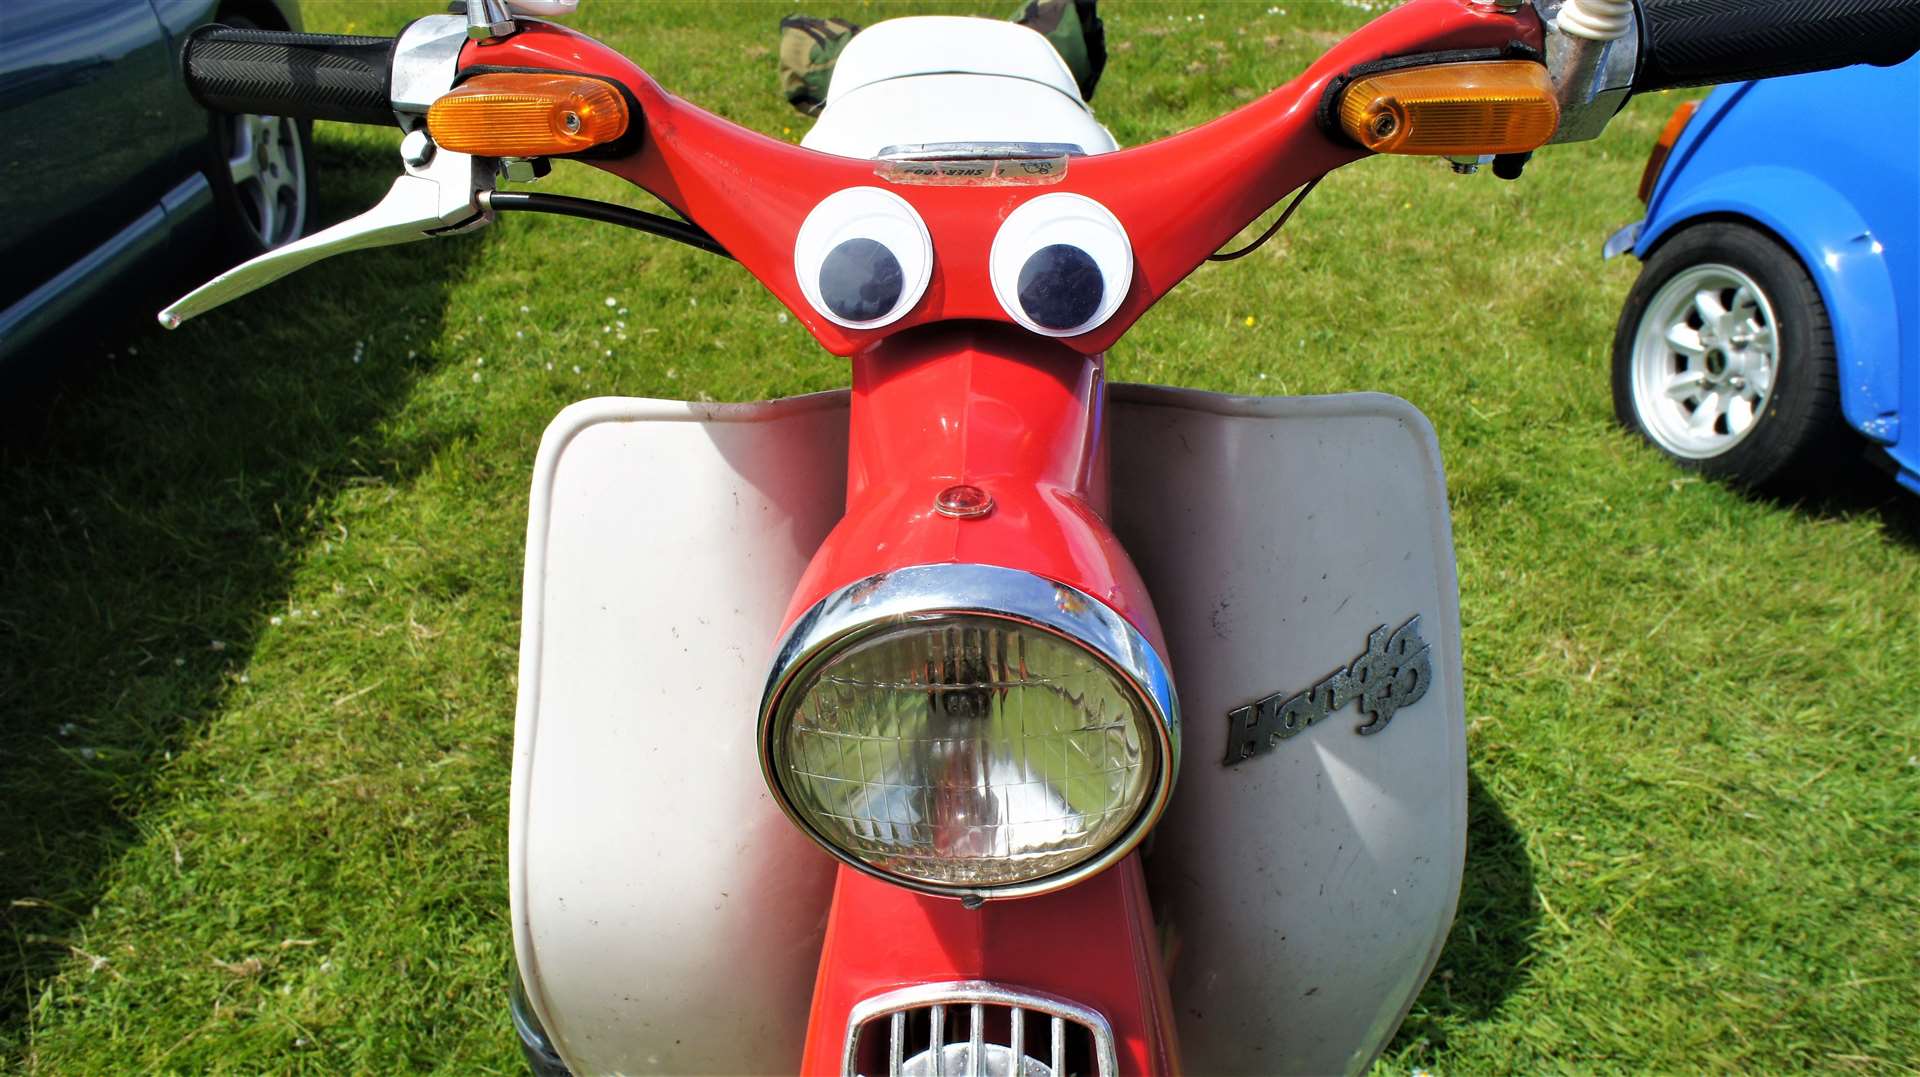 Googly eyes on a Honda 50 moped. Picture: DGS